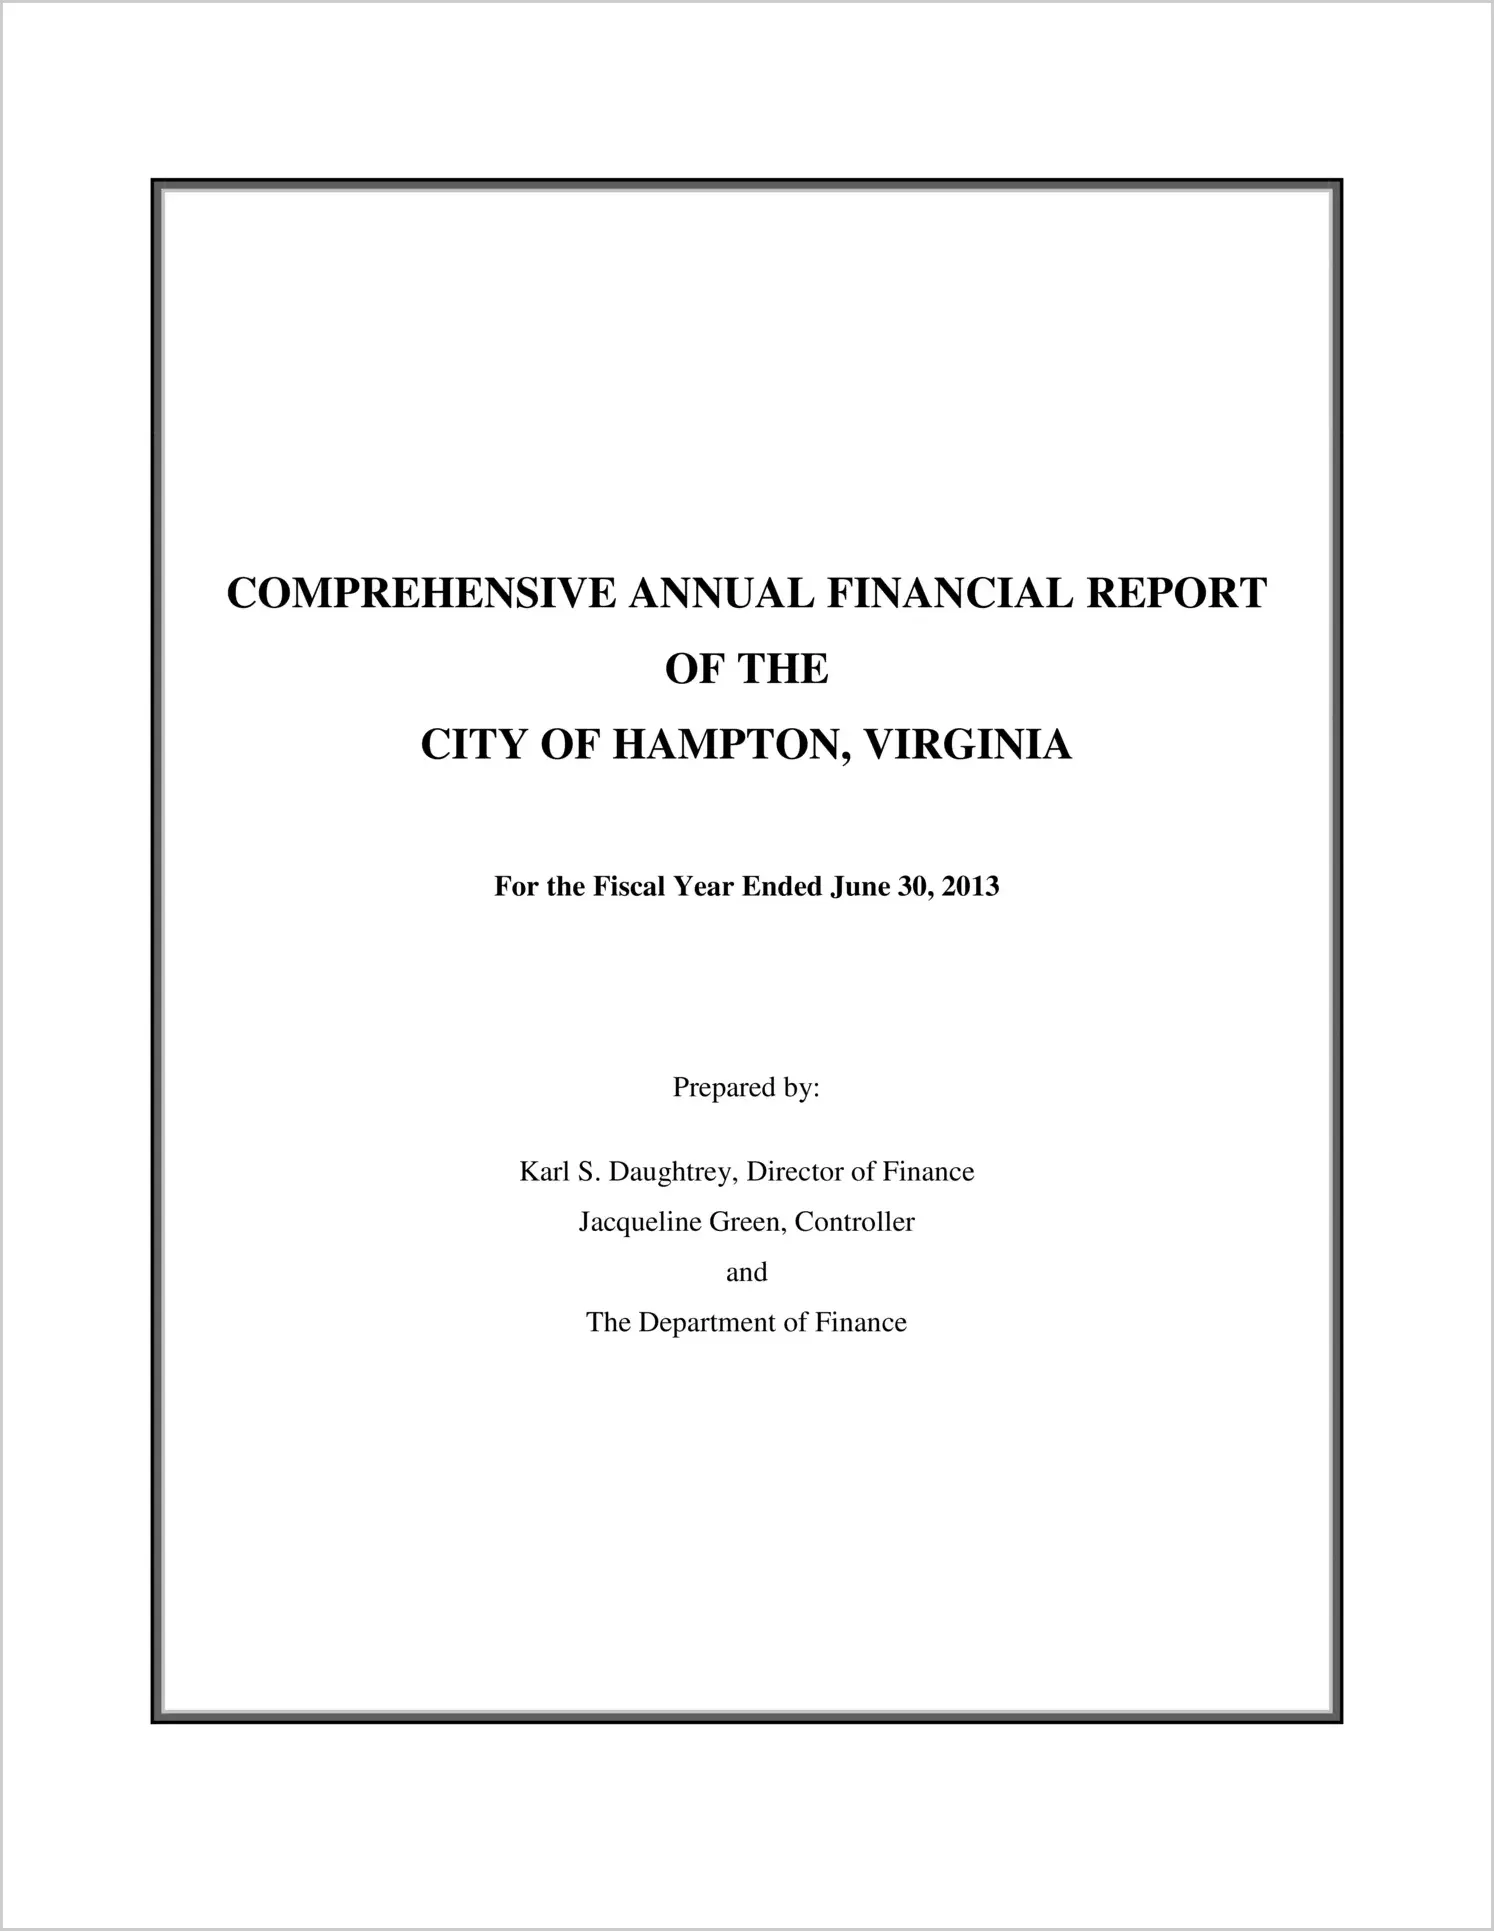 2013 Annual Financial Report for City of Hampton